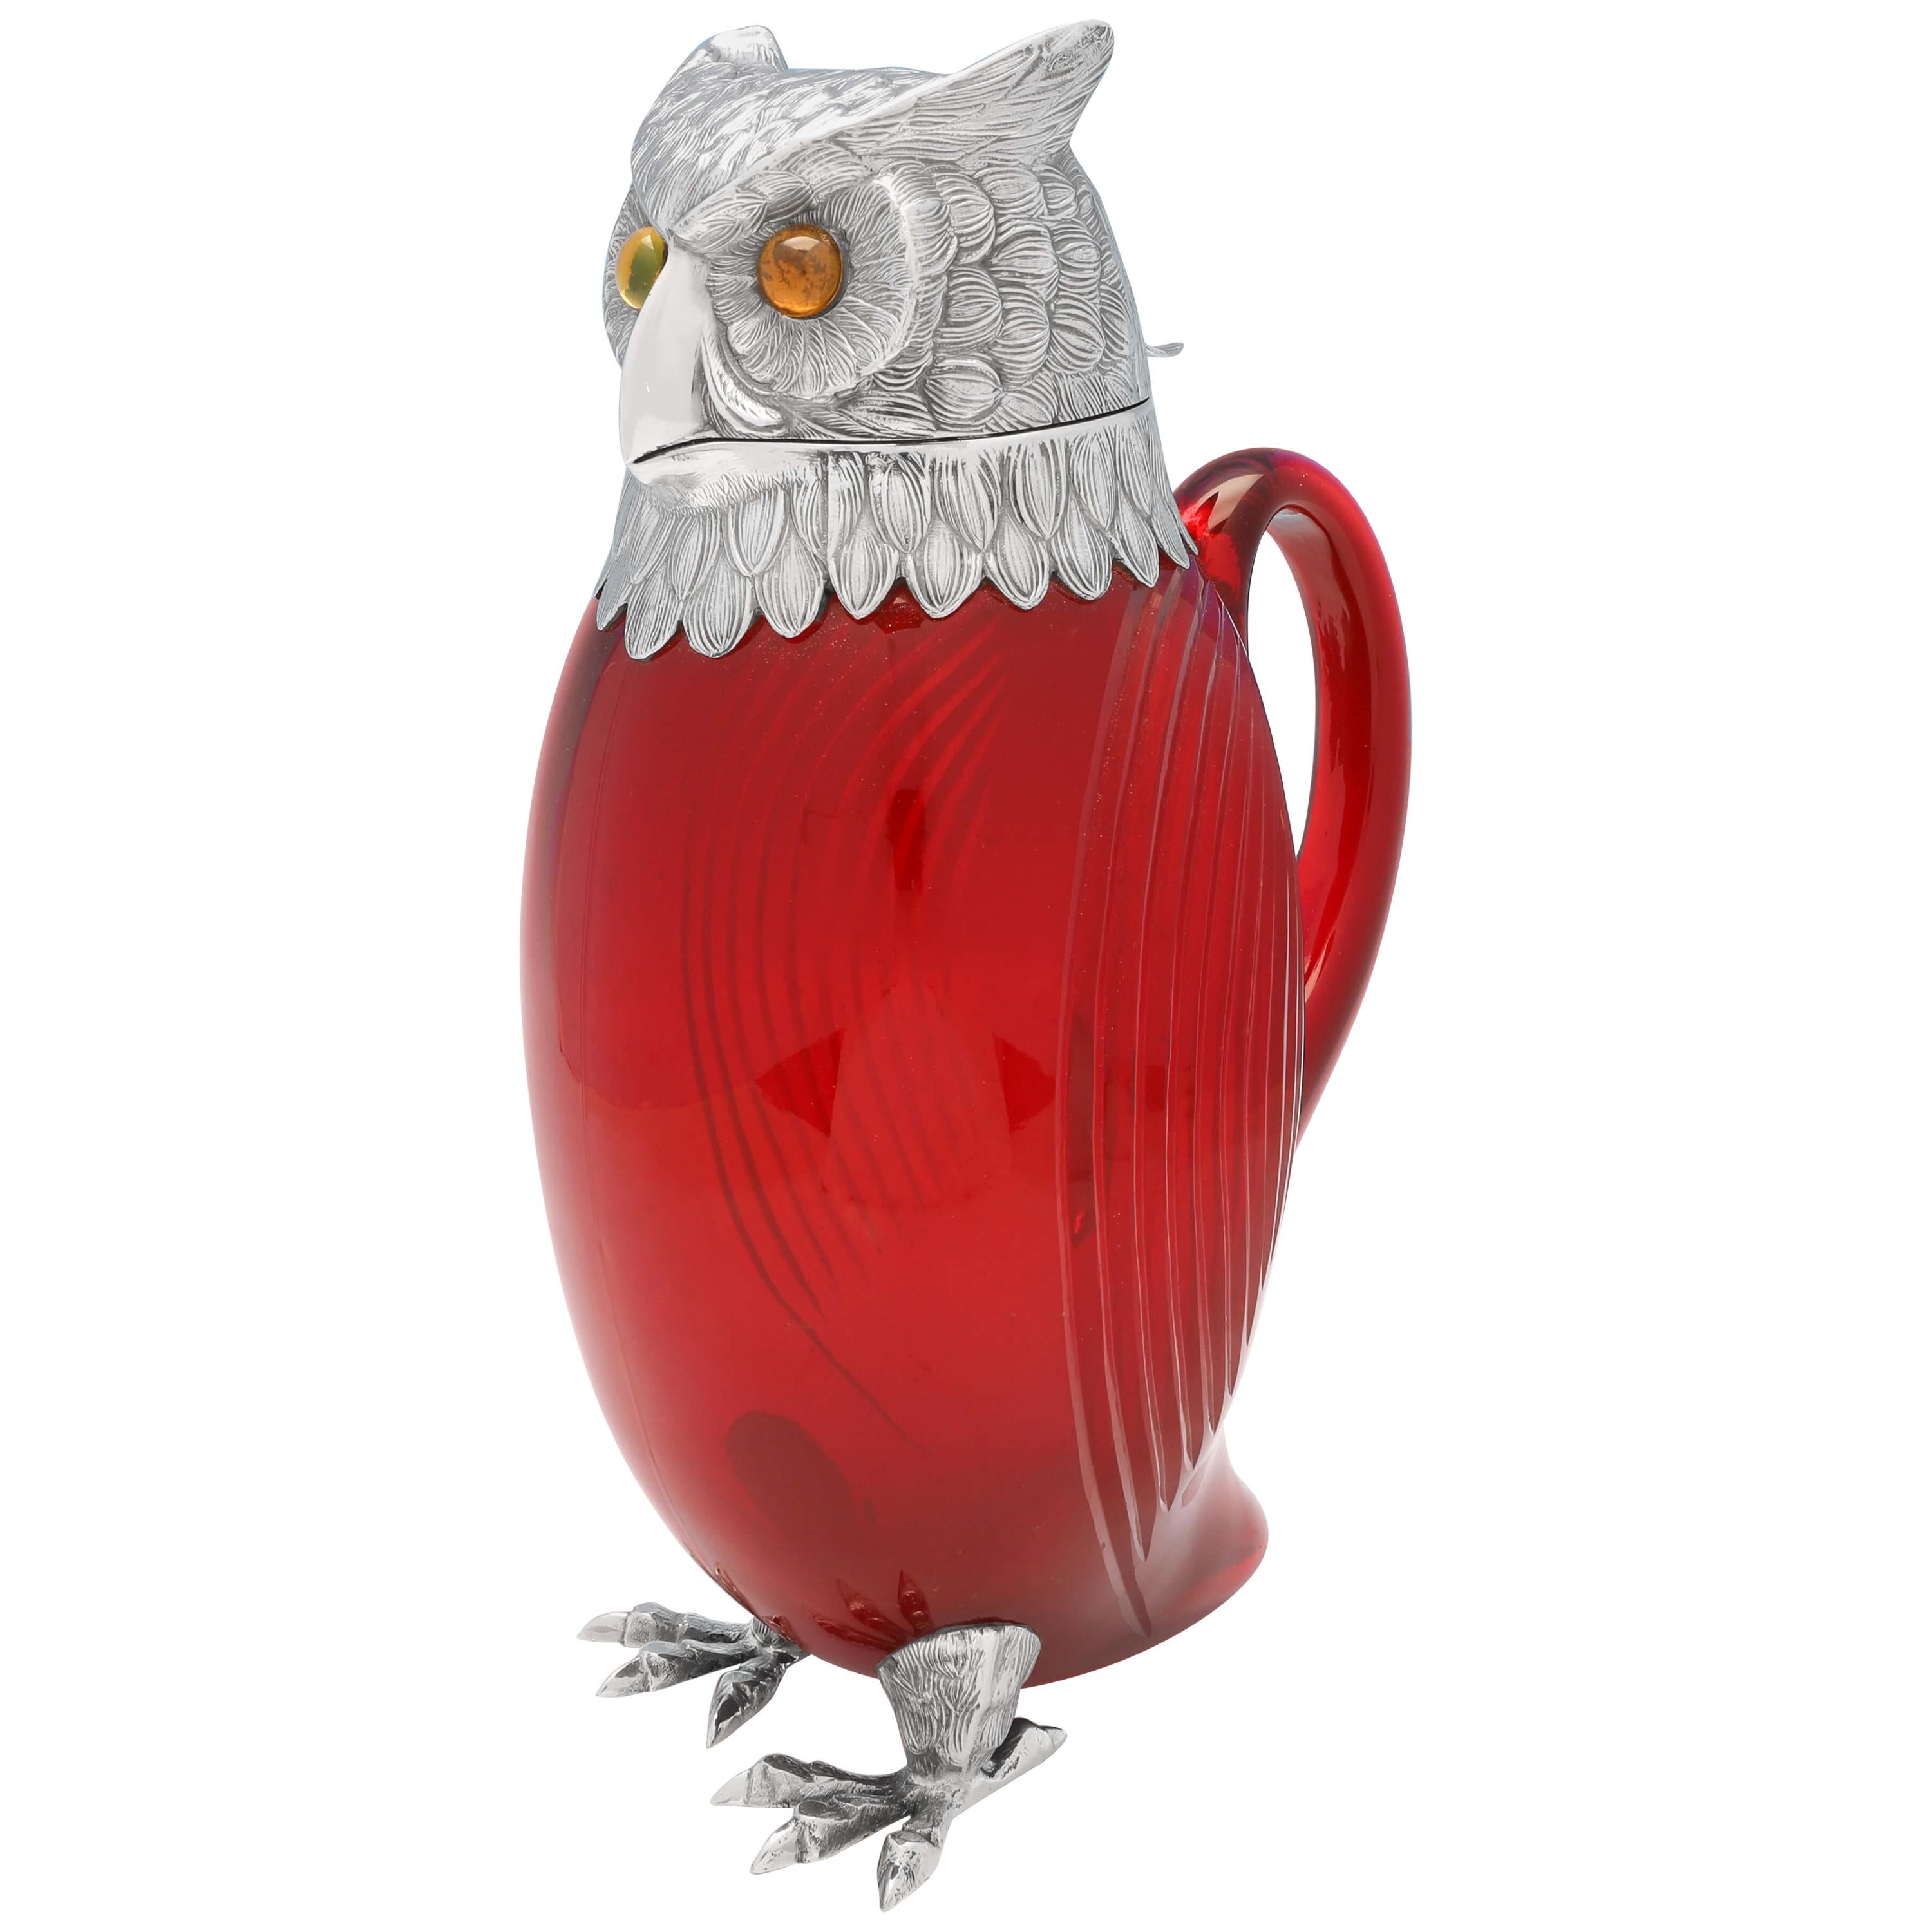 Novelty Red Glass and Sterling Silver Owl Claret Jug from London, 1972